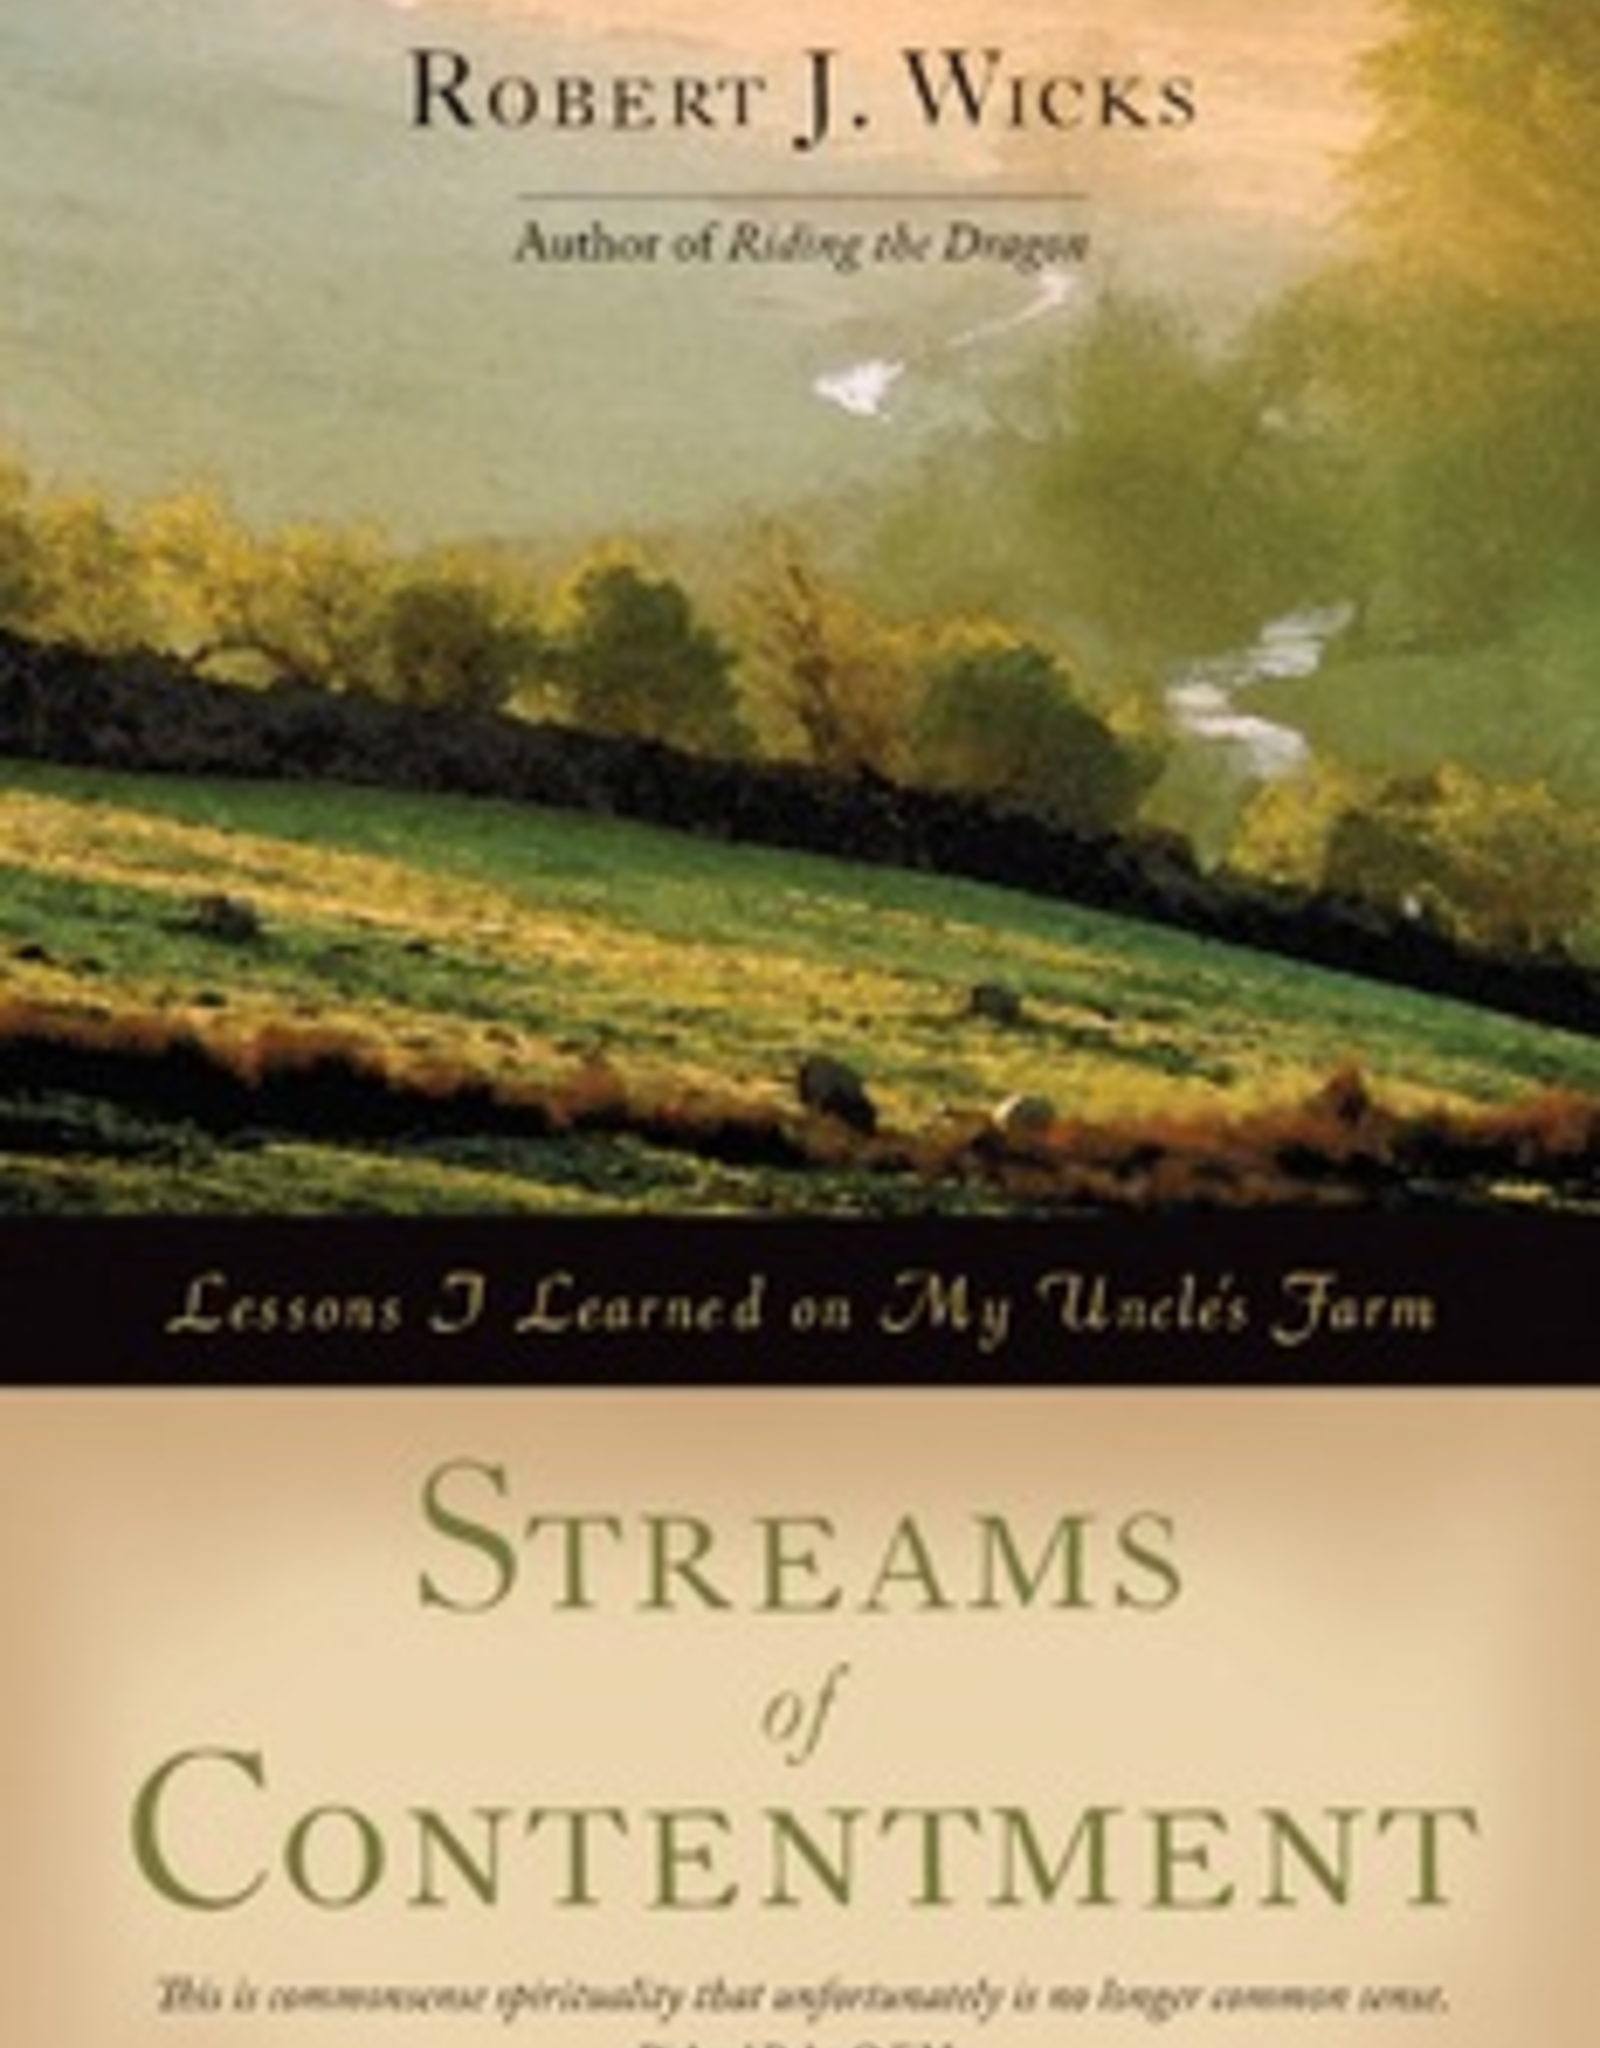 Ave Maria Press Streams of Contentment, by Robert J. Wicks (paperback)